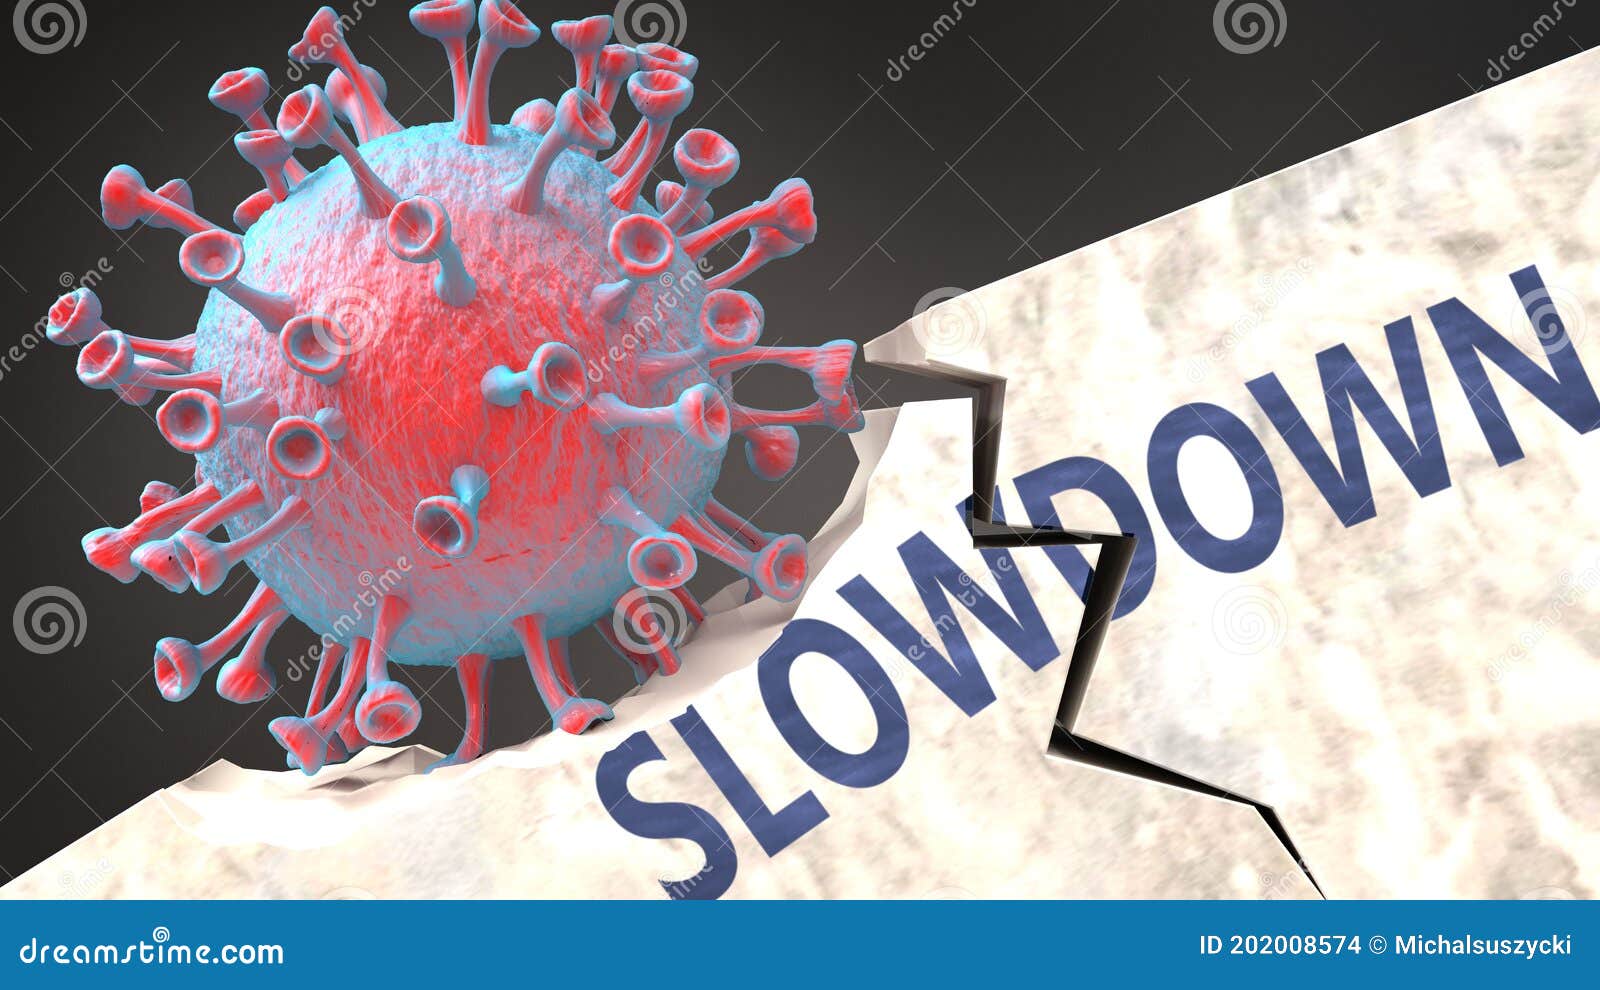 covid virus causing slowdown, breaking an established and sturdy structure creating slowdown in the world, 3d 